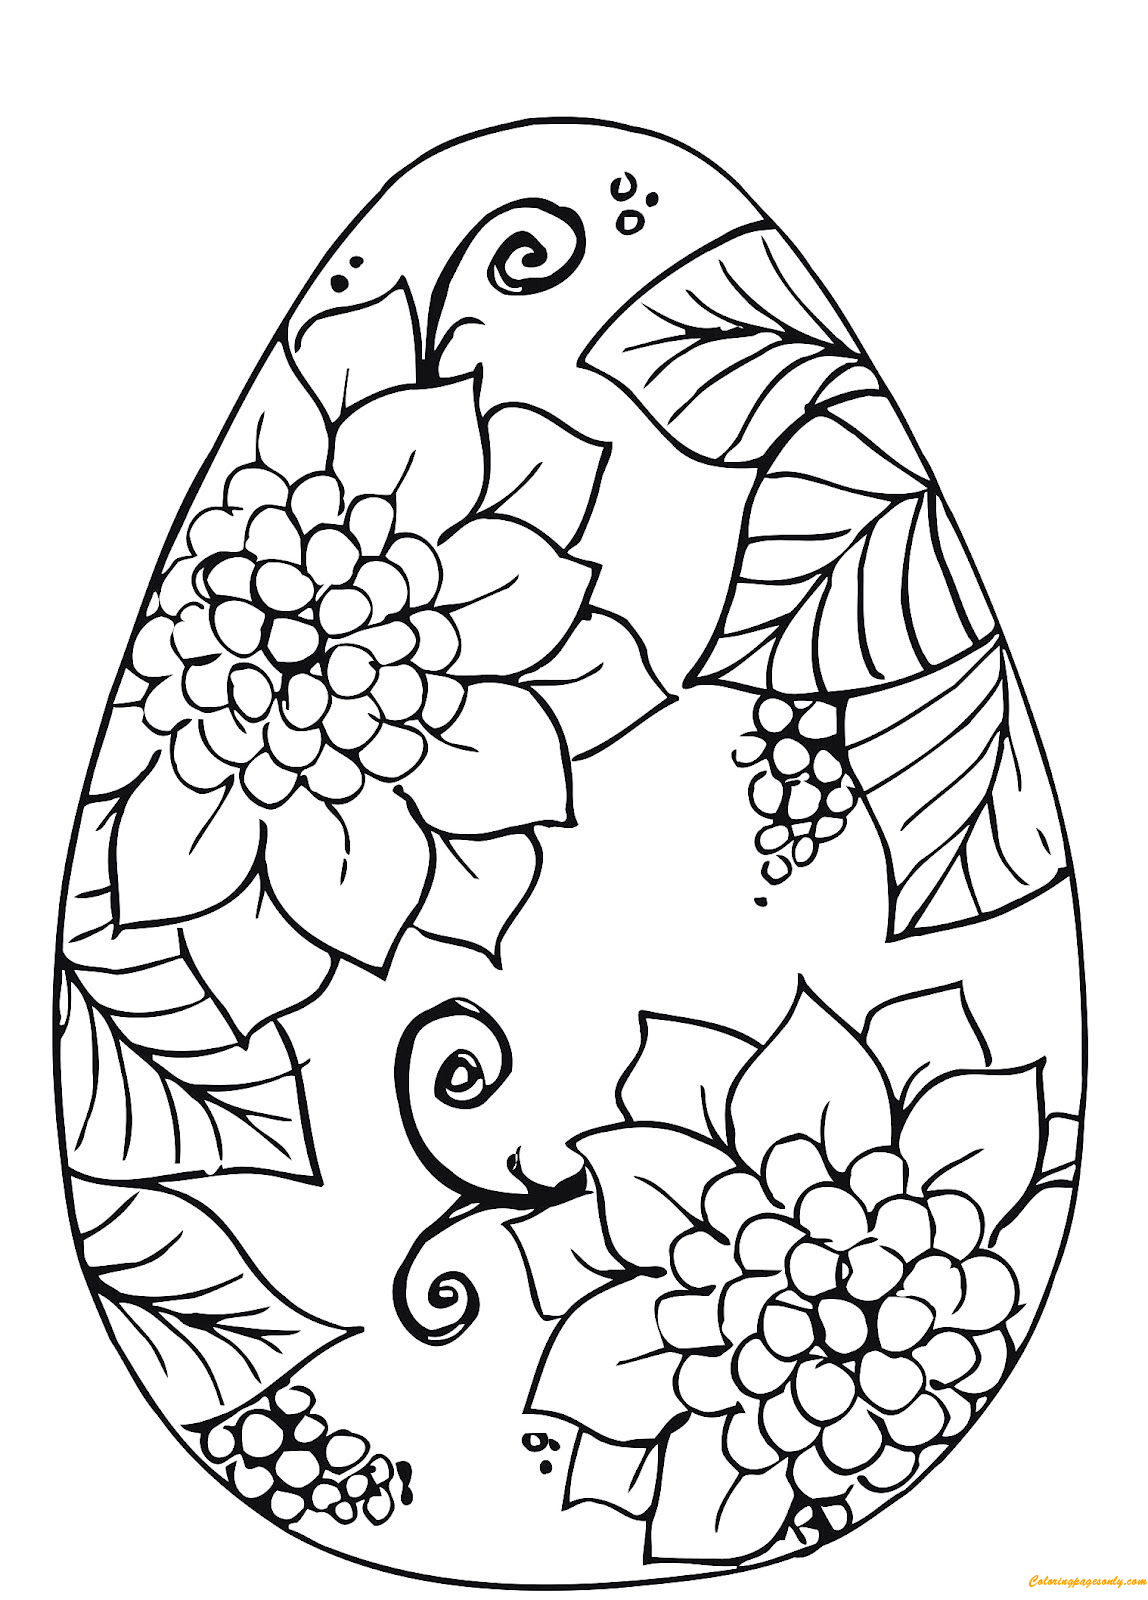 Easter Egg Flower Patterns Coloring Page - Free Coloring ...